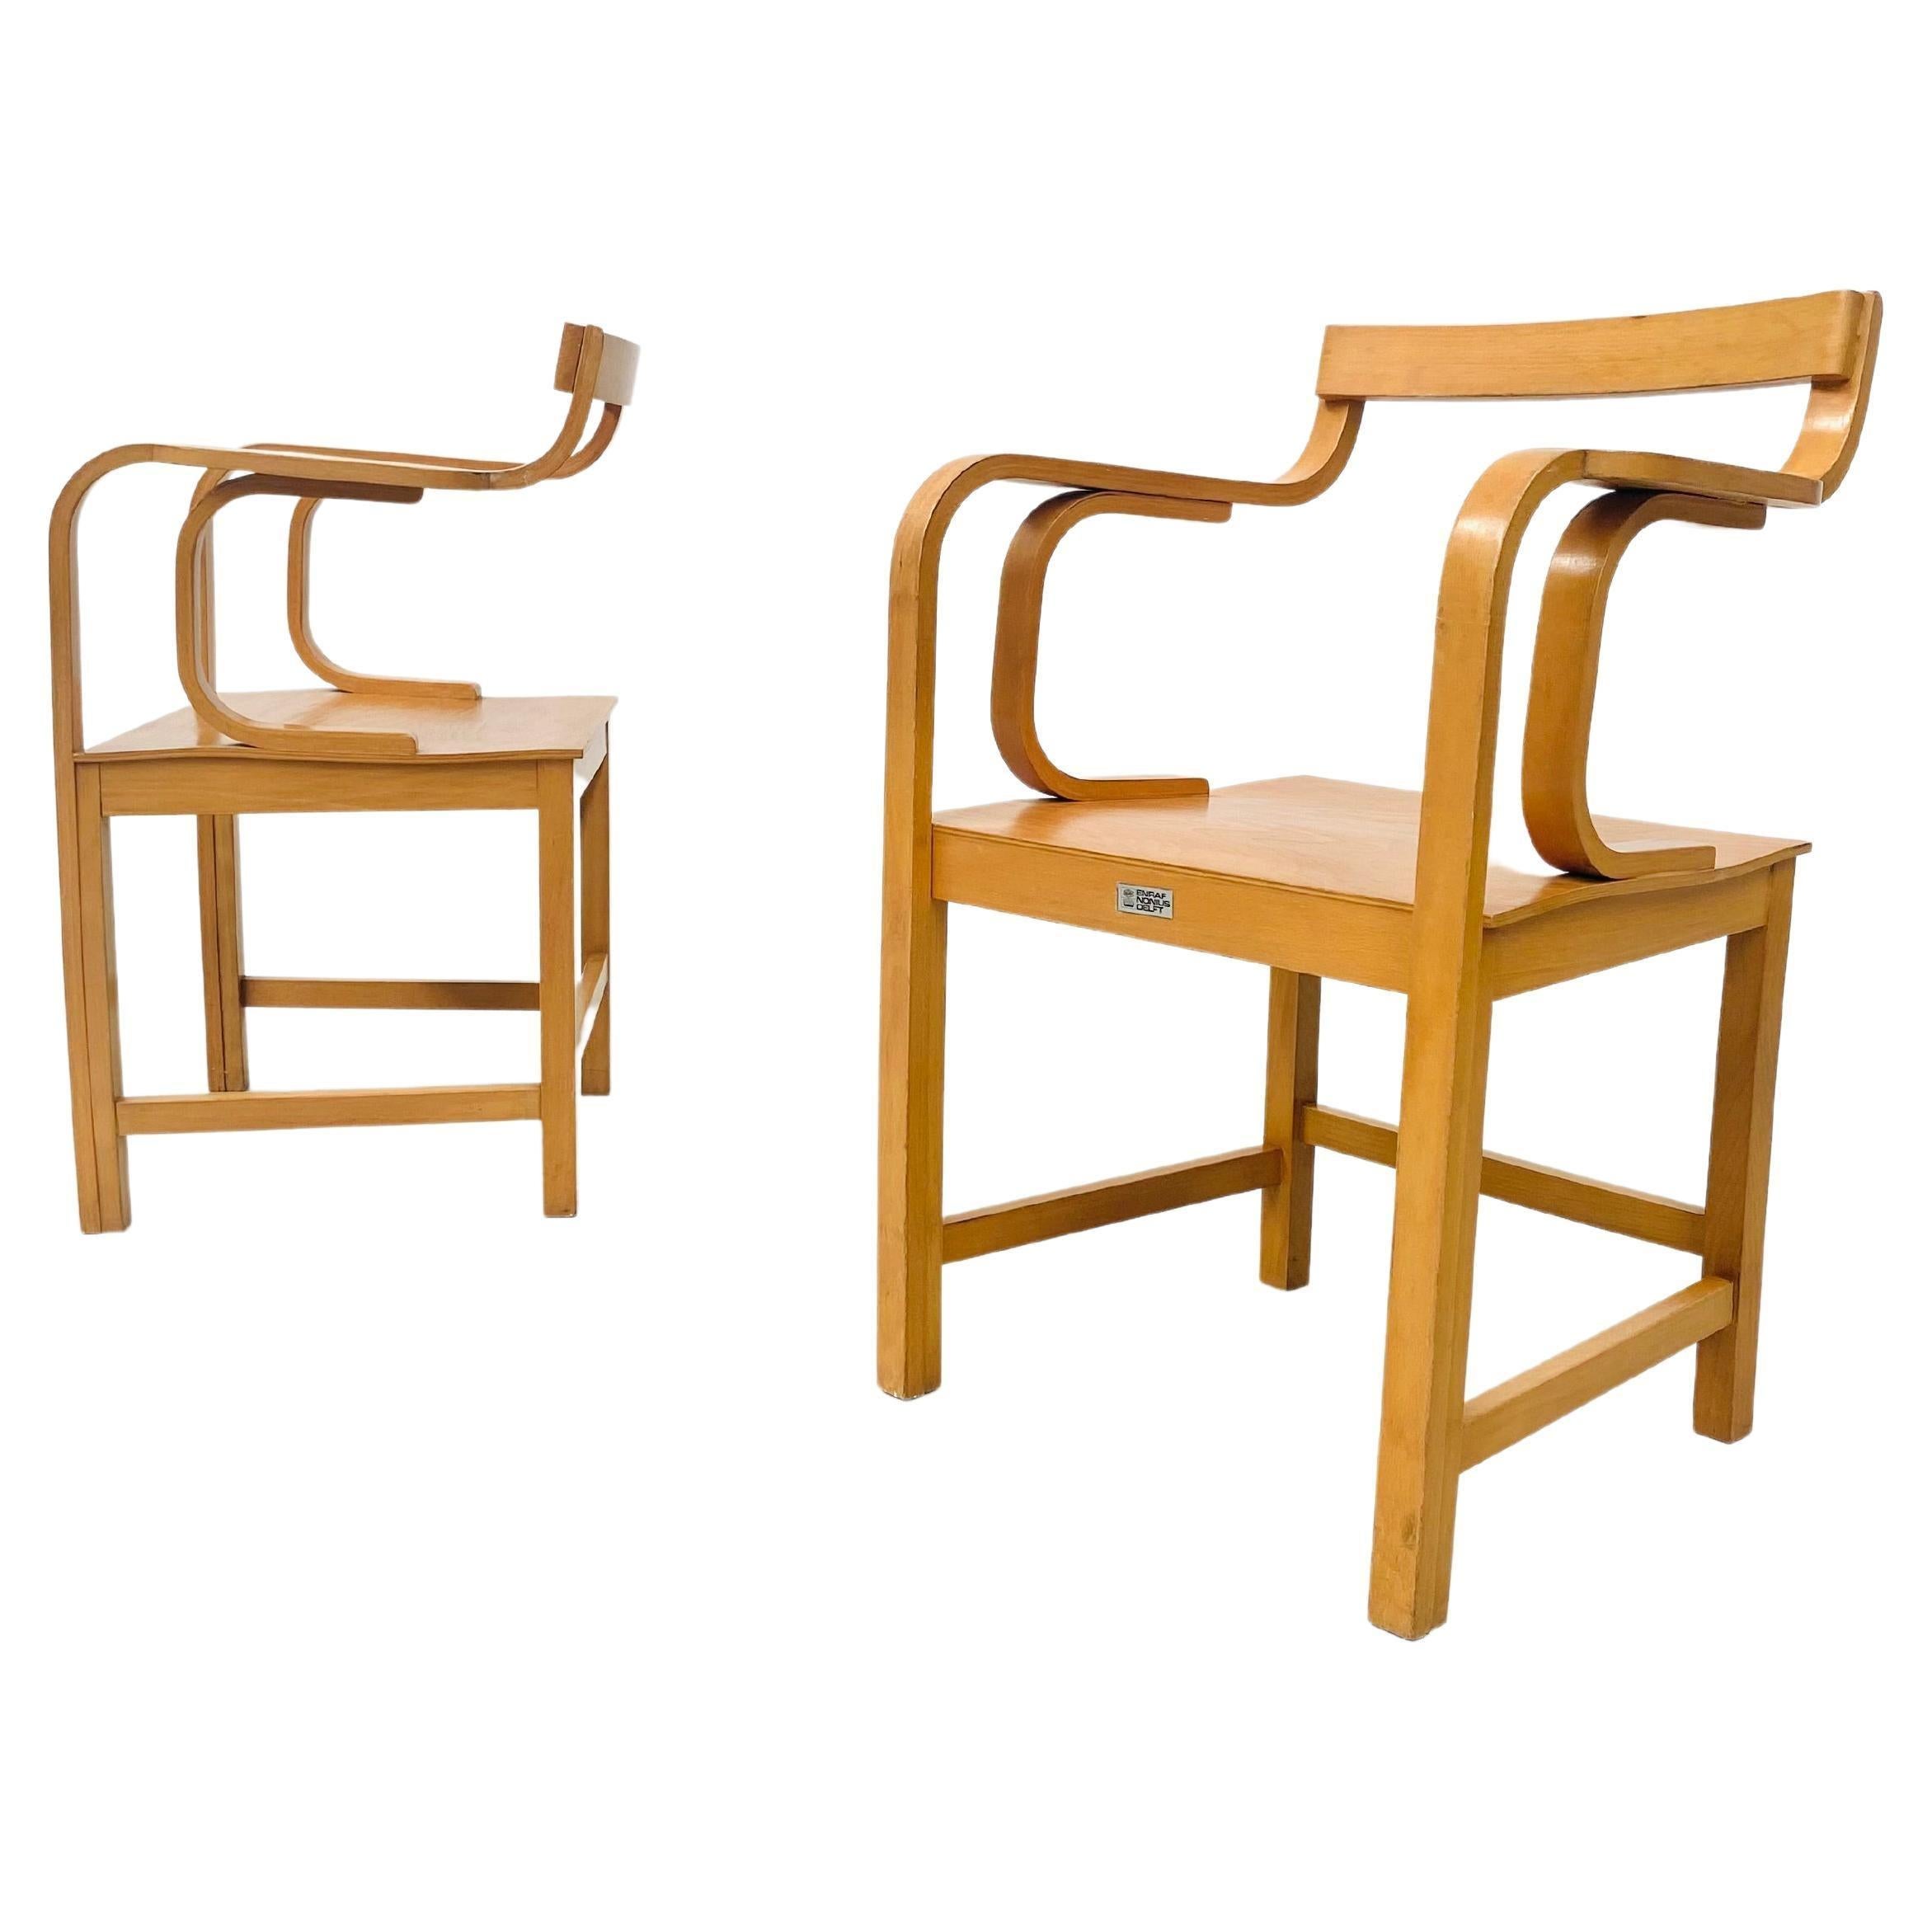 Vintage Dutch Plywood Beech Armchairs by Enraf Nonius Delft, 1970s For Sale